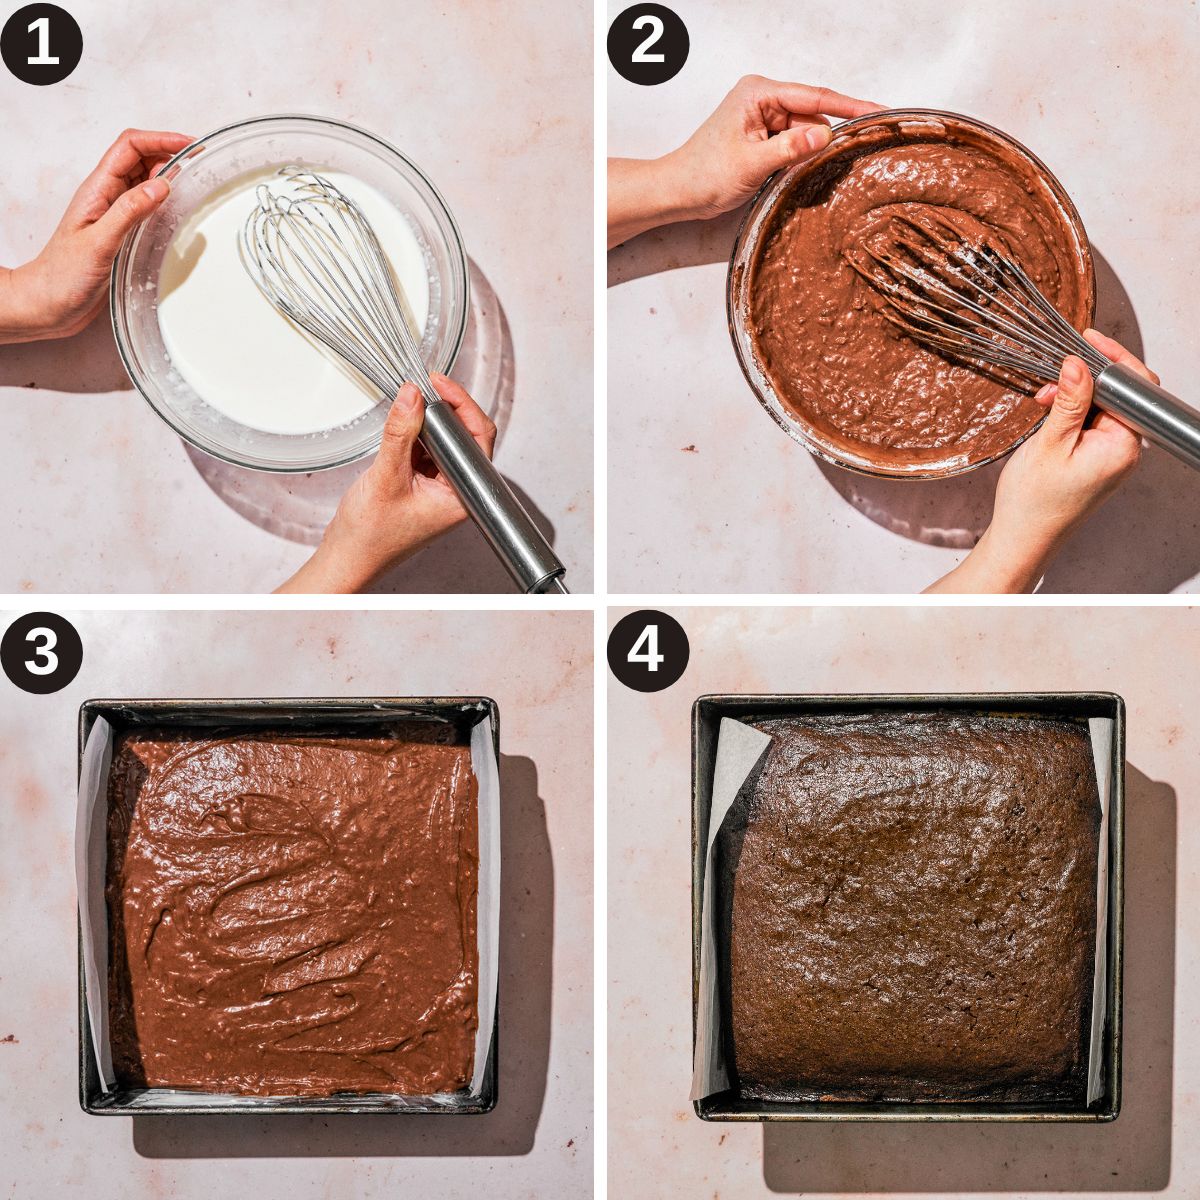 Mayonnaise cake steps 1 to 4, mixing wet ingredients, finished batter, before and after baking.